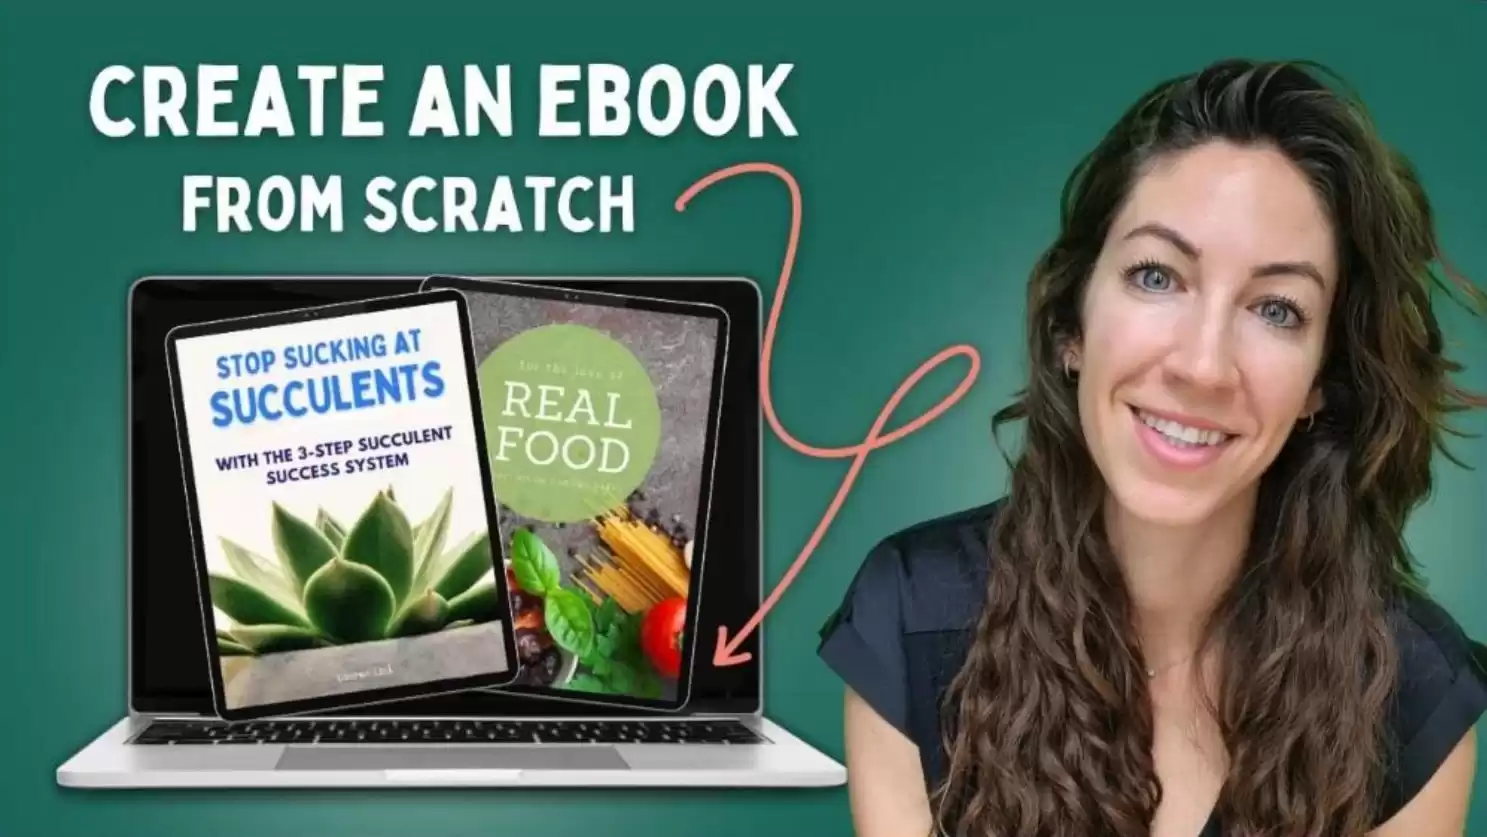 Skillshare Course – Create an eBook: Write, Design, and Publish and eBook from Scratch